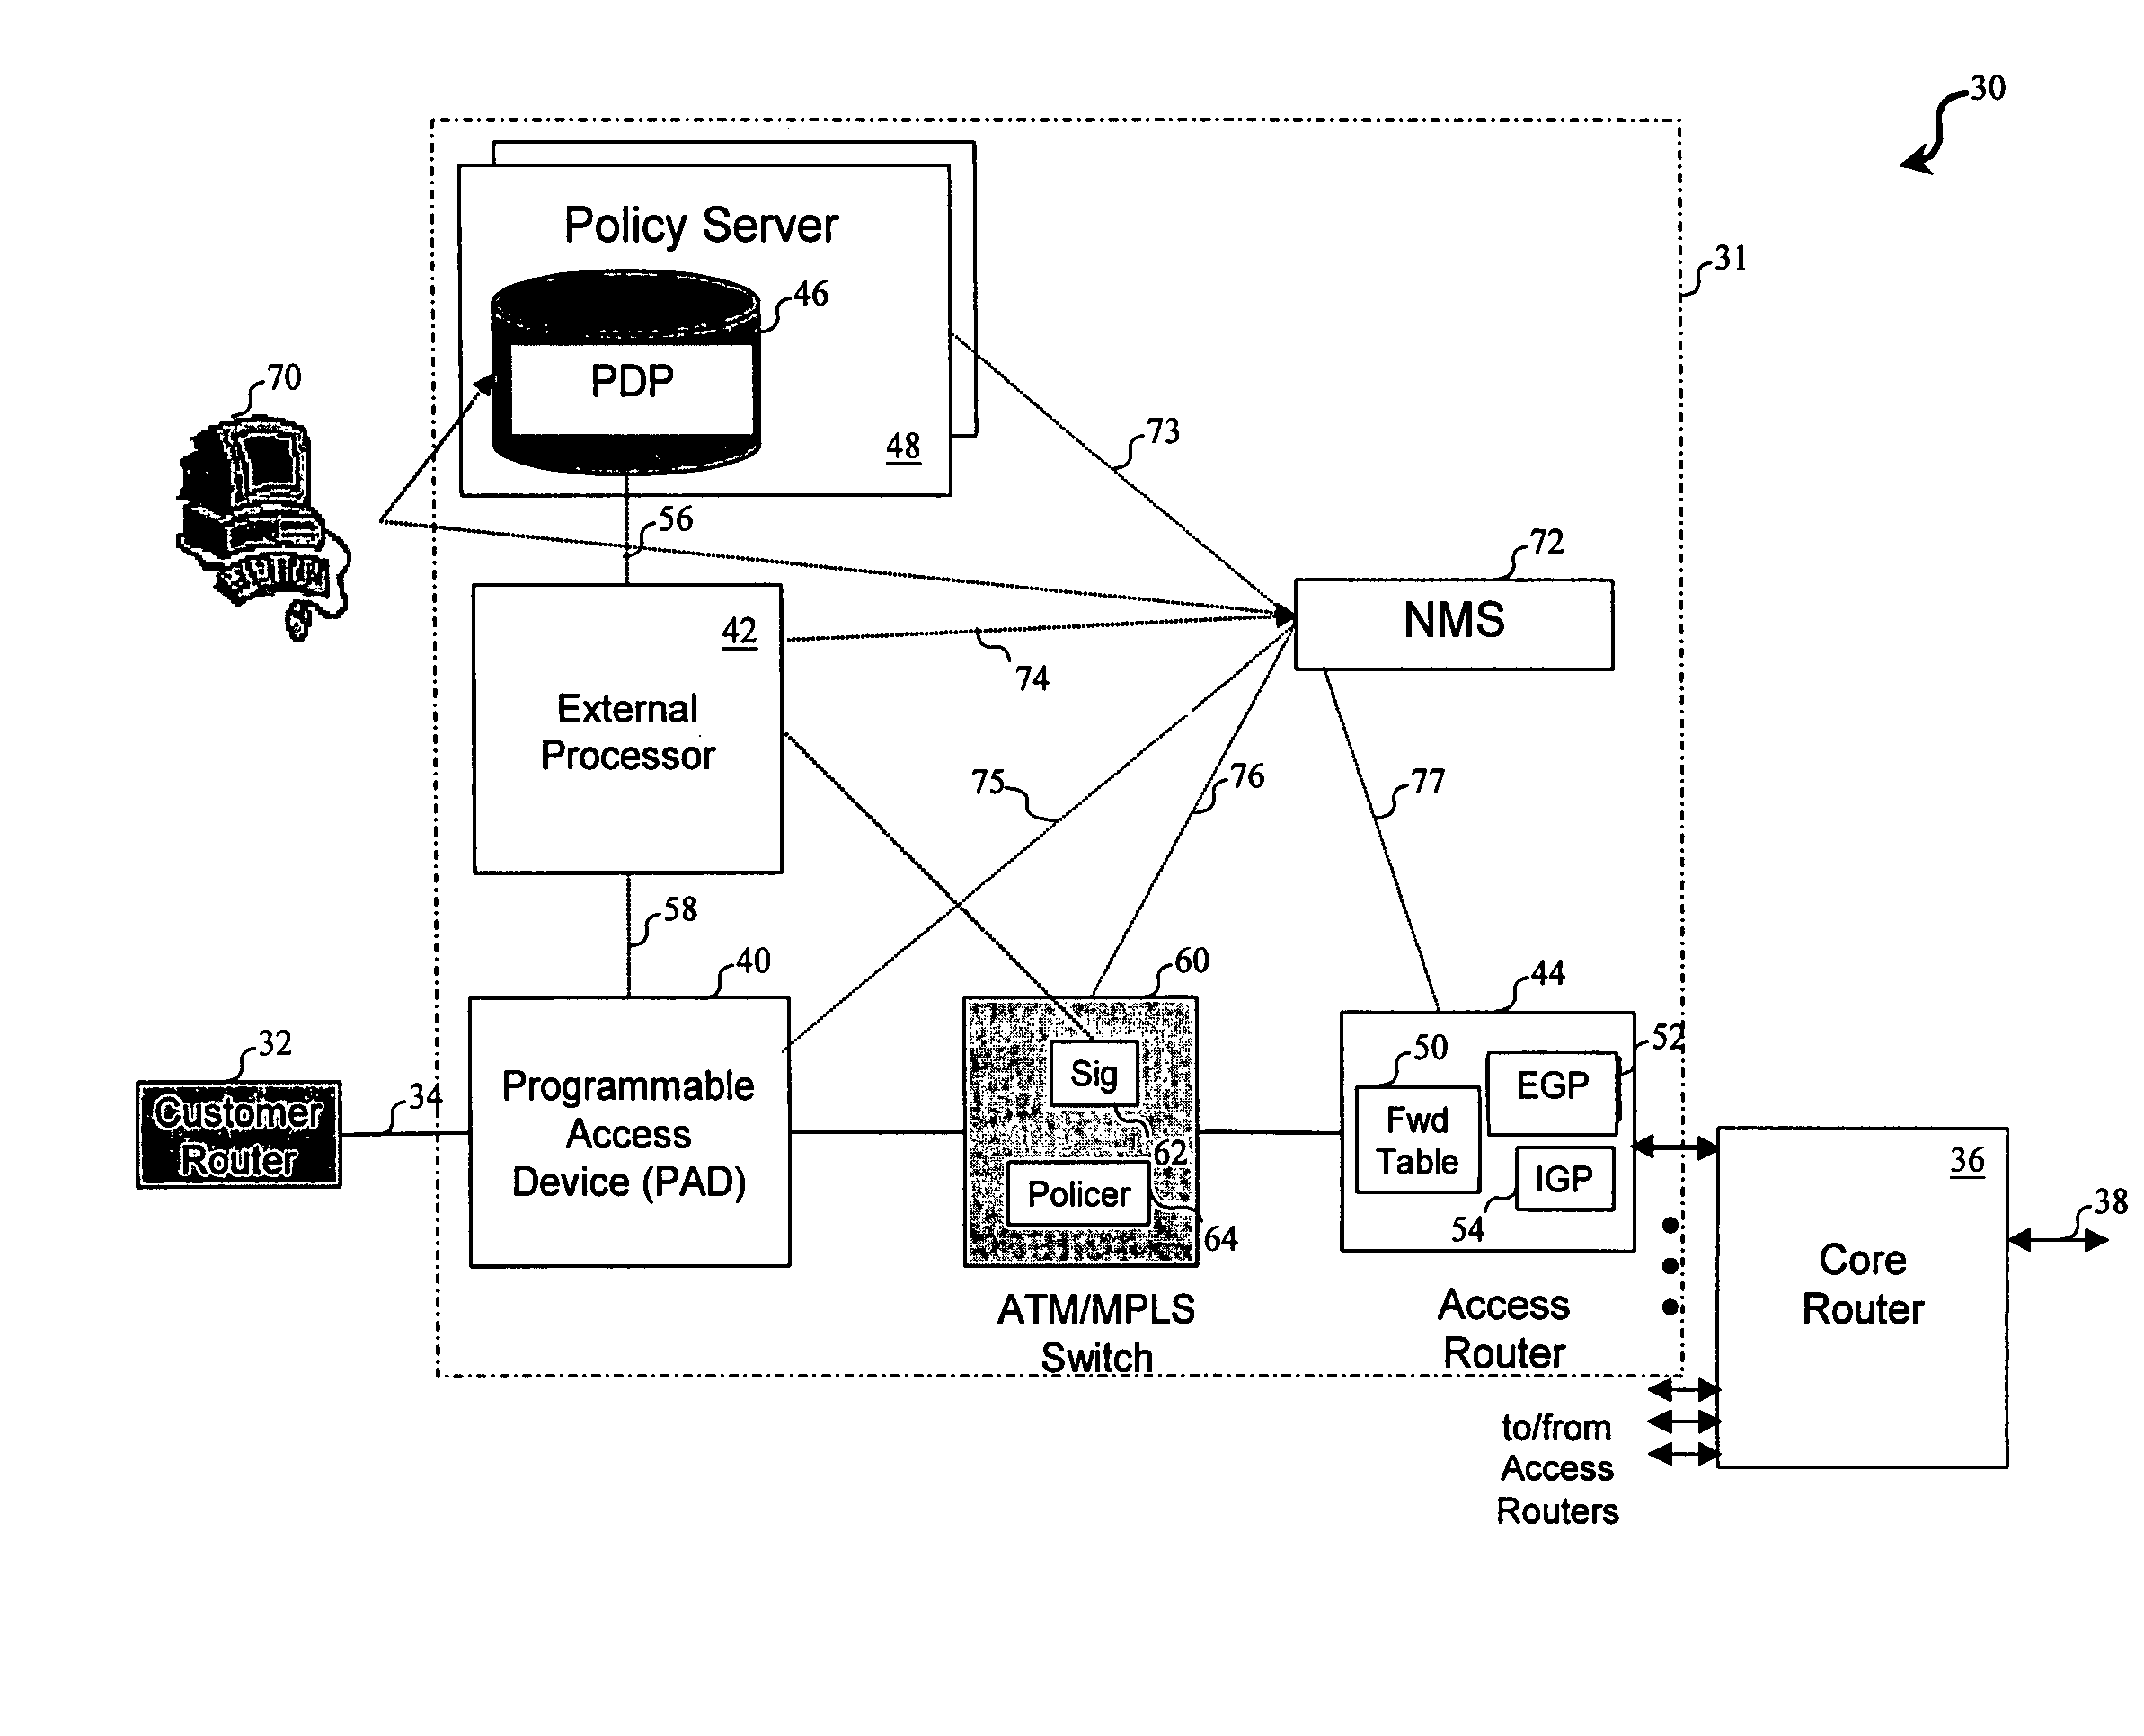 Message, control and reporting interface for a distributed network access system